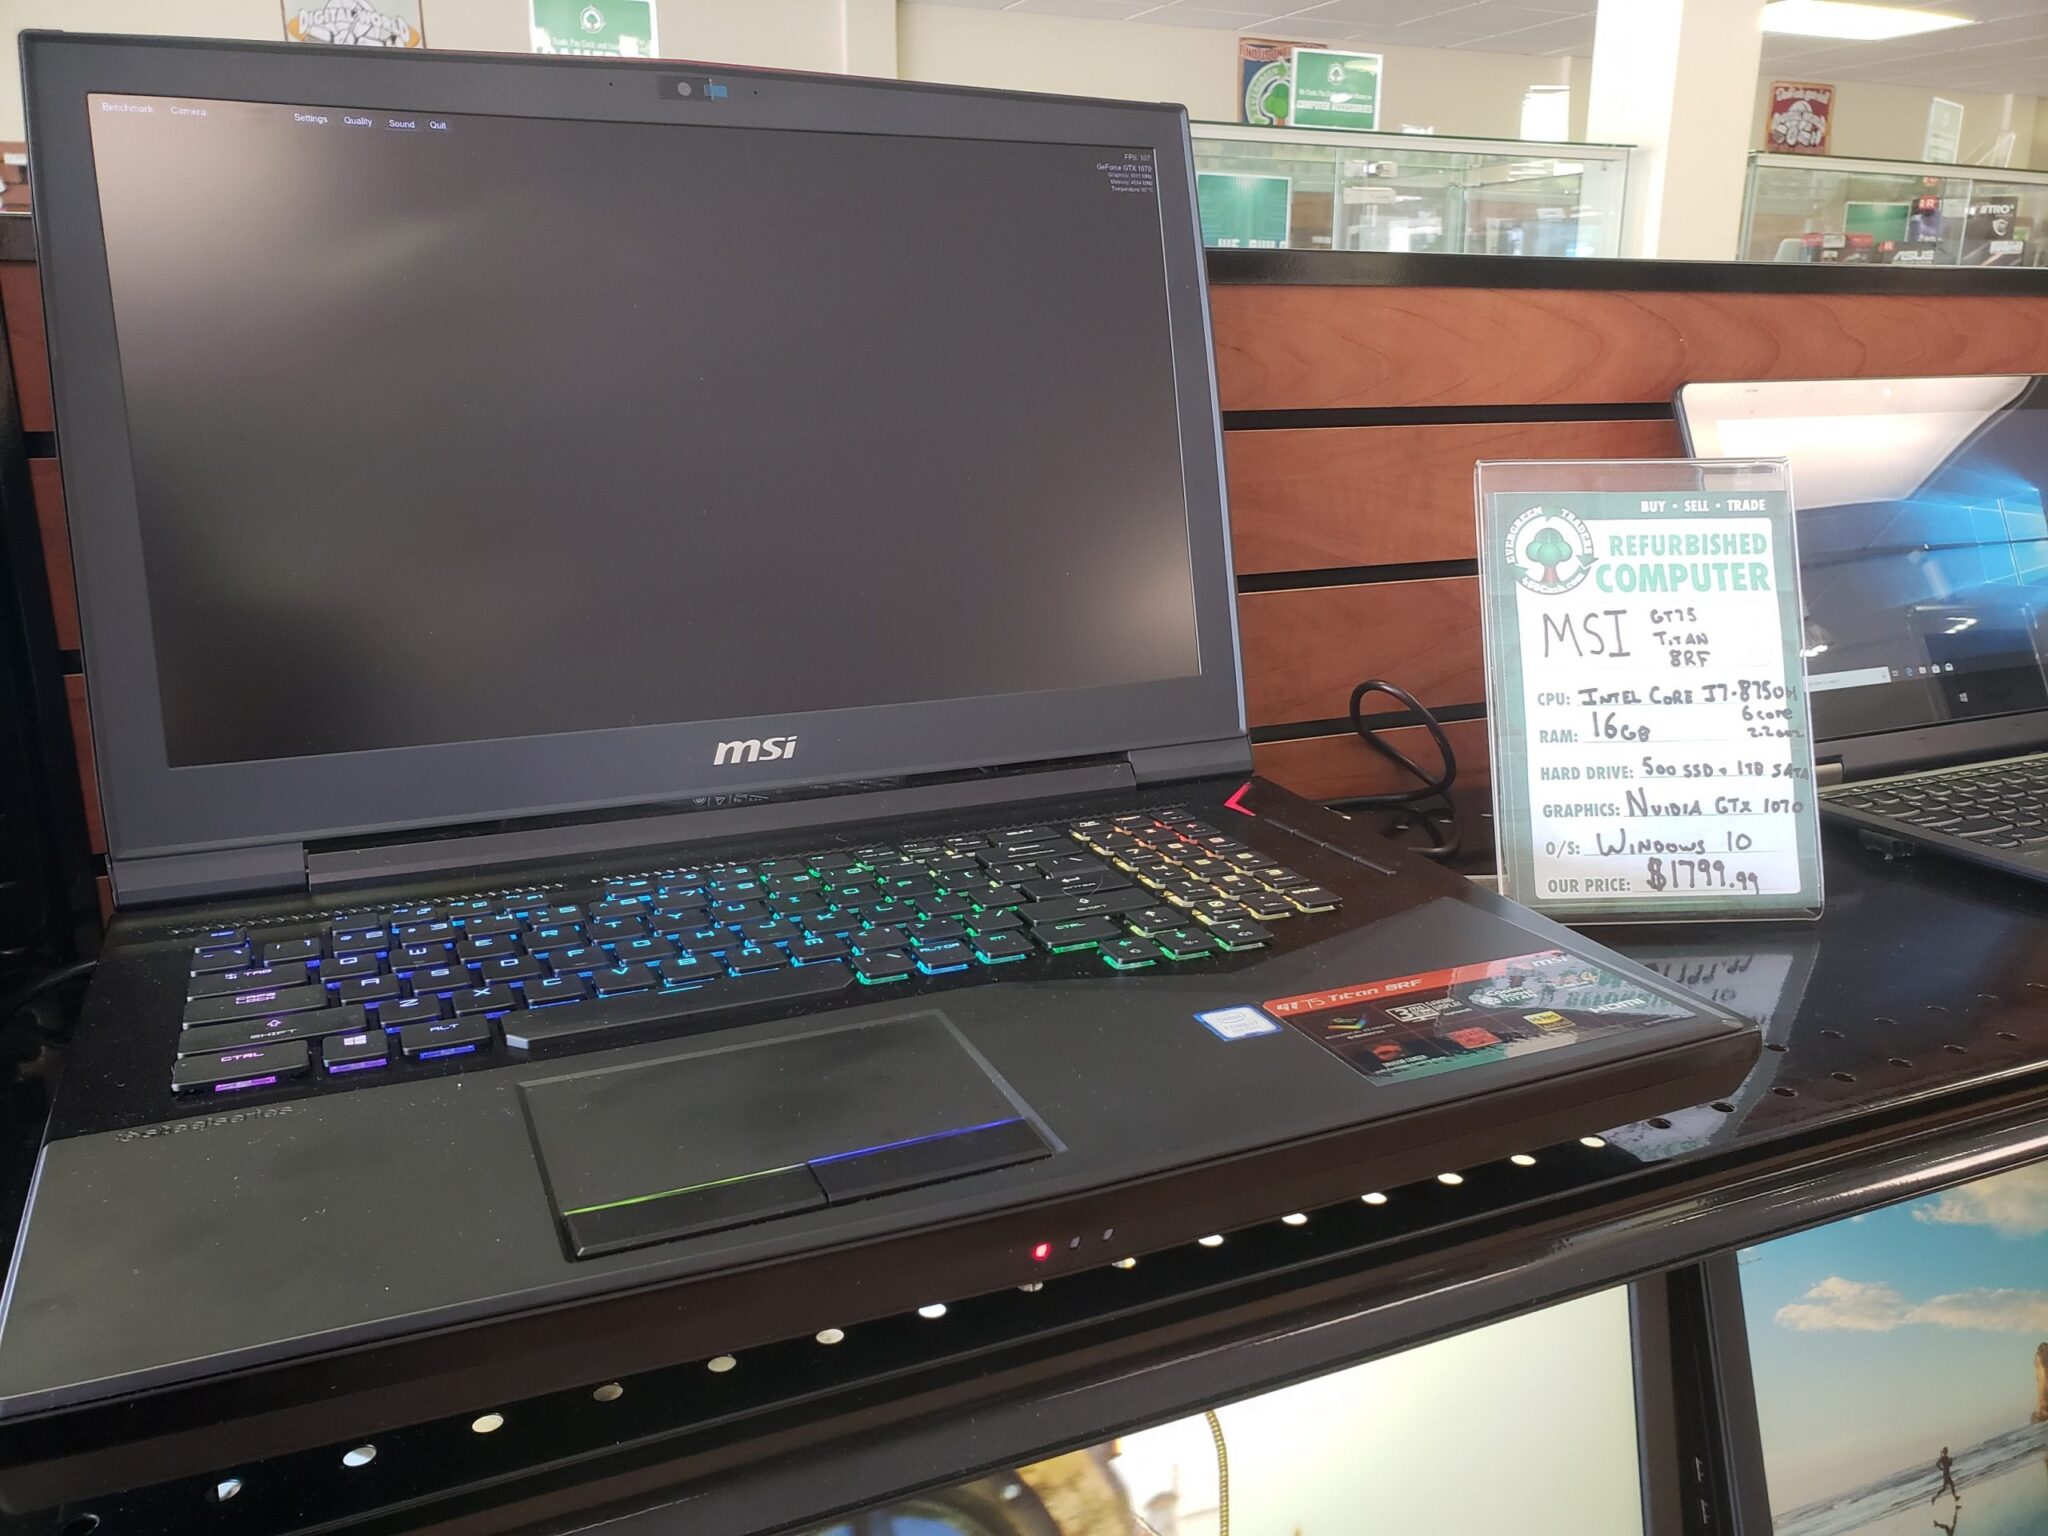 Evergreen Traders has a sick gaming laptop!